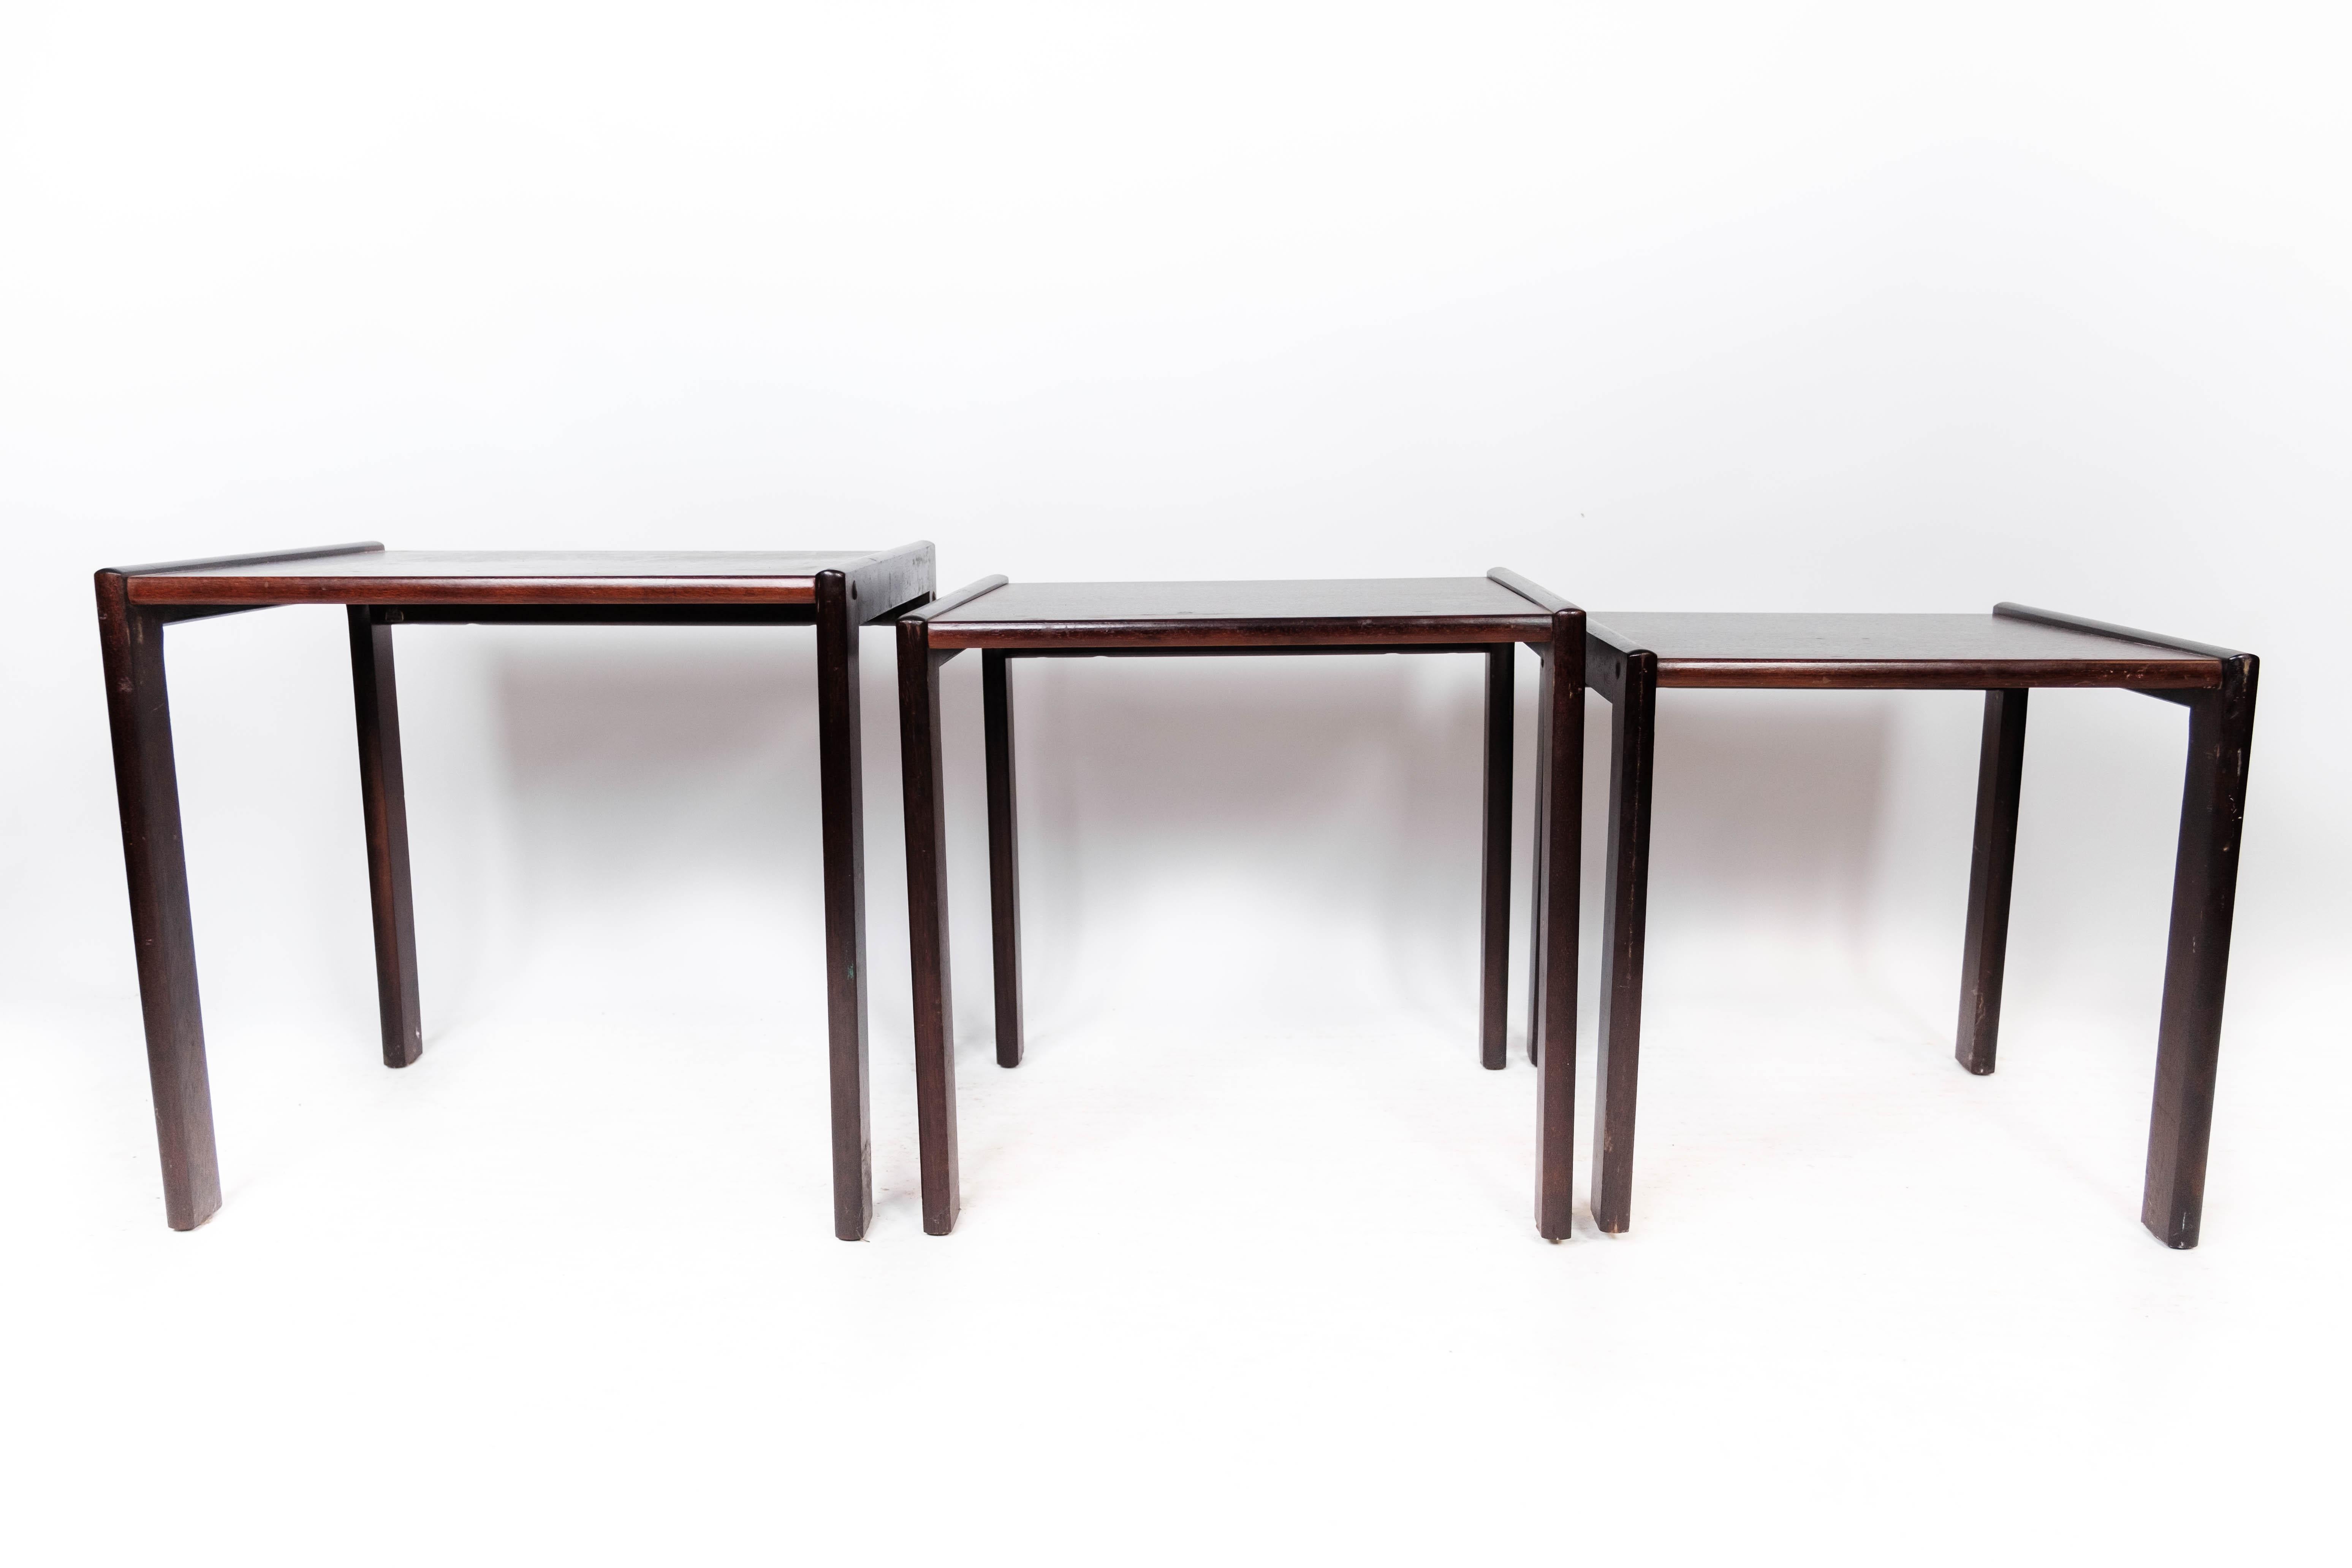 Set of Nesting Tables in Dark Wood of Danish Design from the 1960s For Sale 3